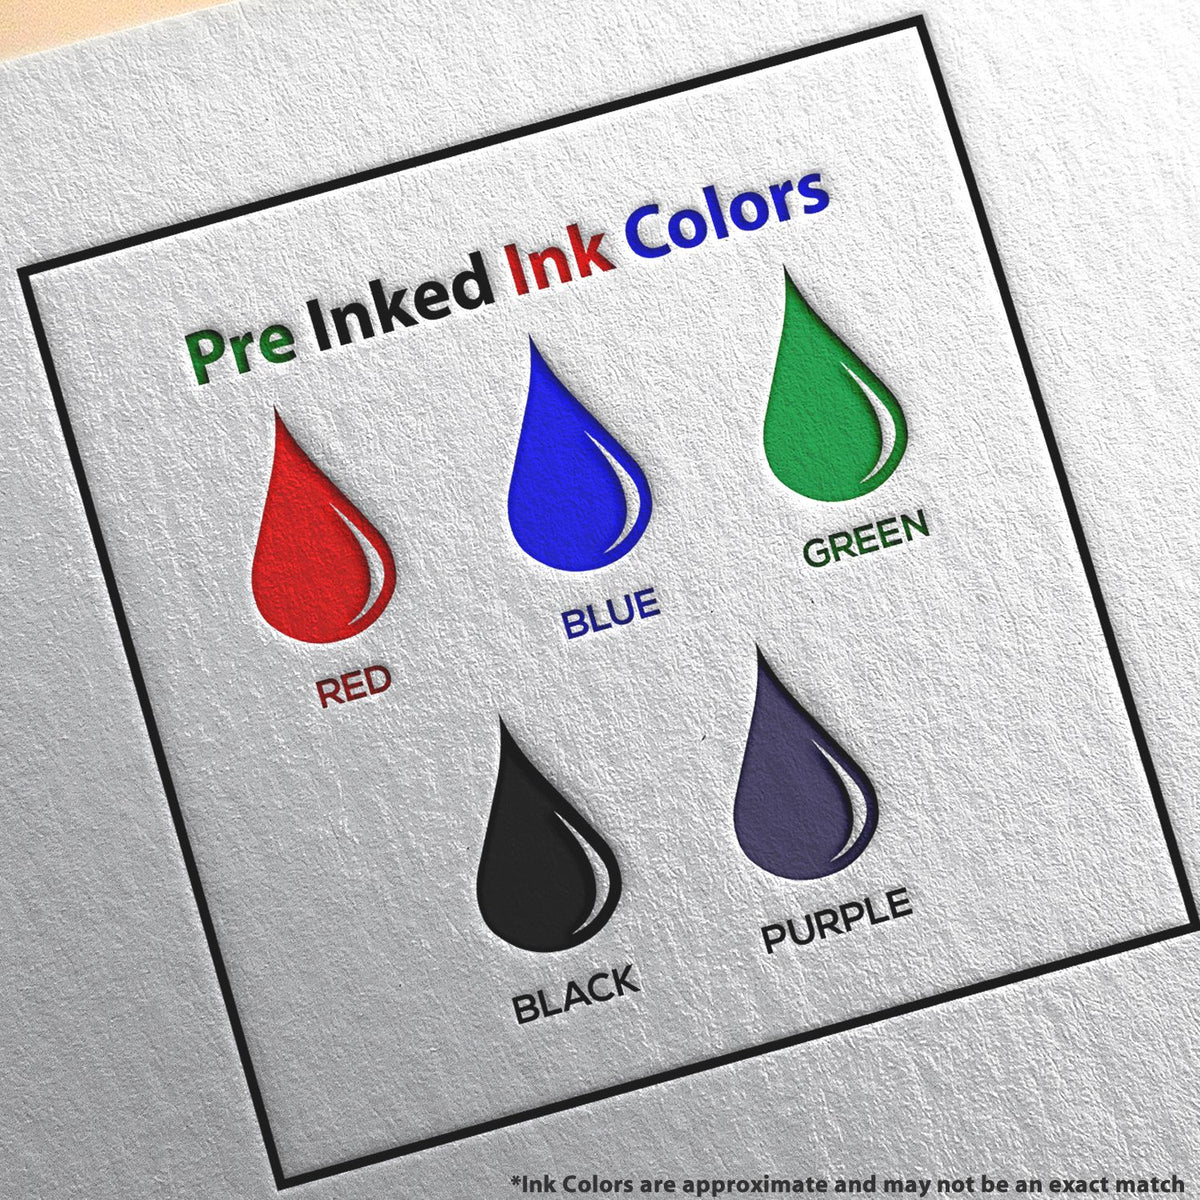 A picture showing the different ink colors or hues available for the Premium MaxLight Pre-Inked Nevada Landscape Architectural Stamp product.